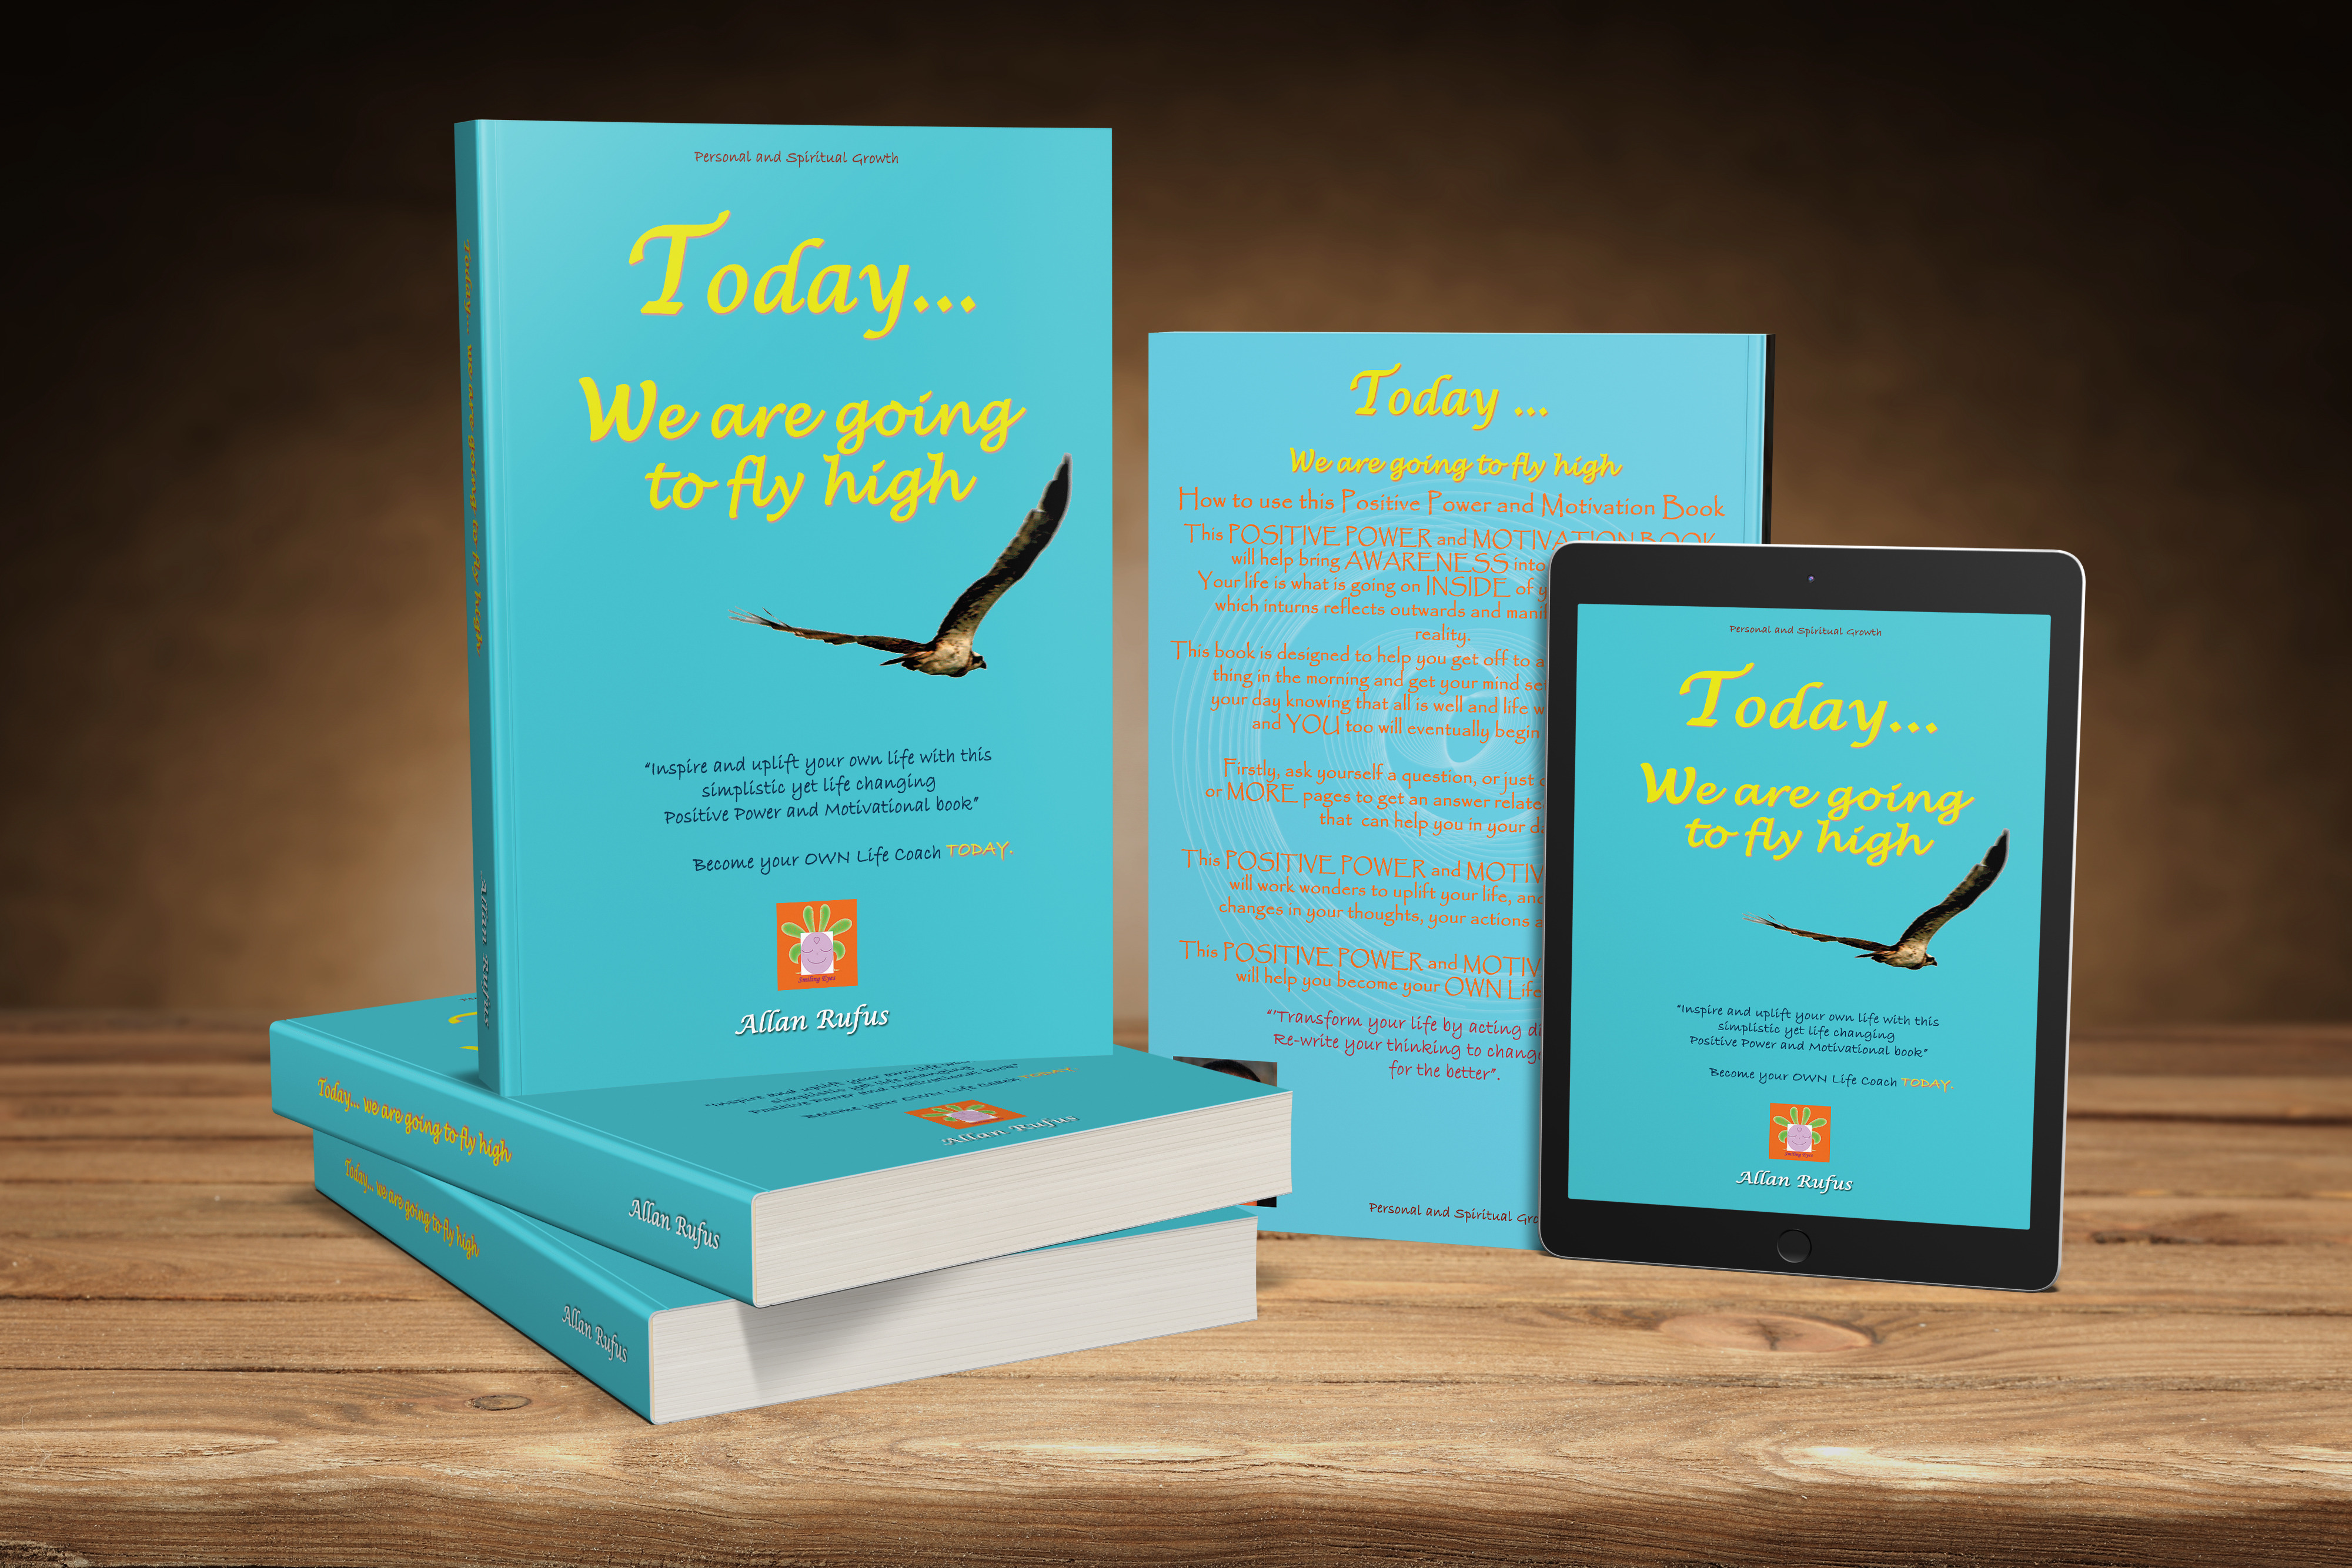 Today We are going to fly high Book and Ebook by Allan Rufus